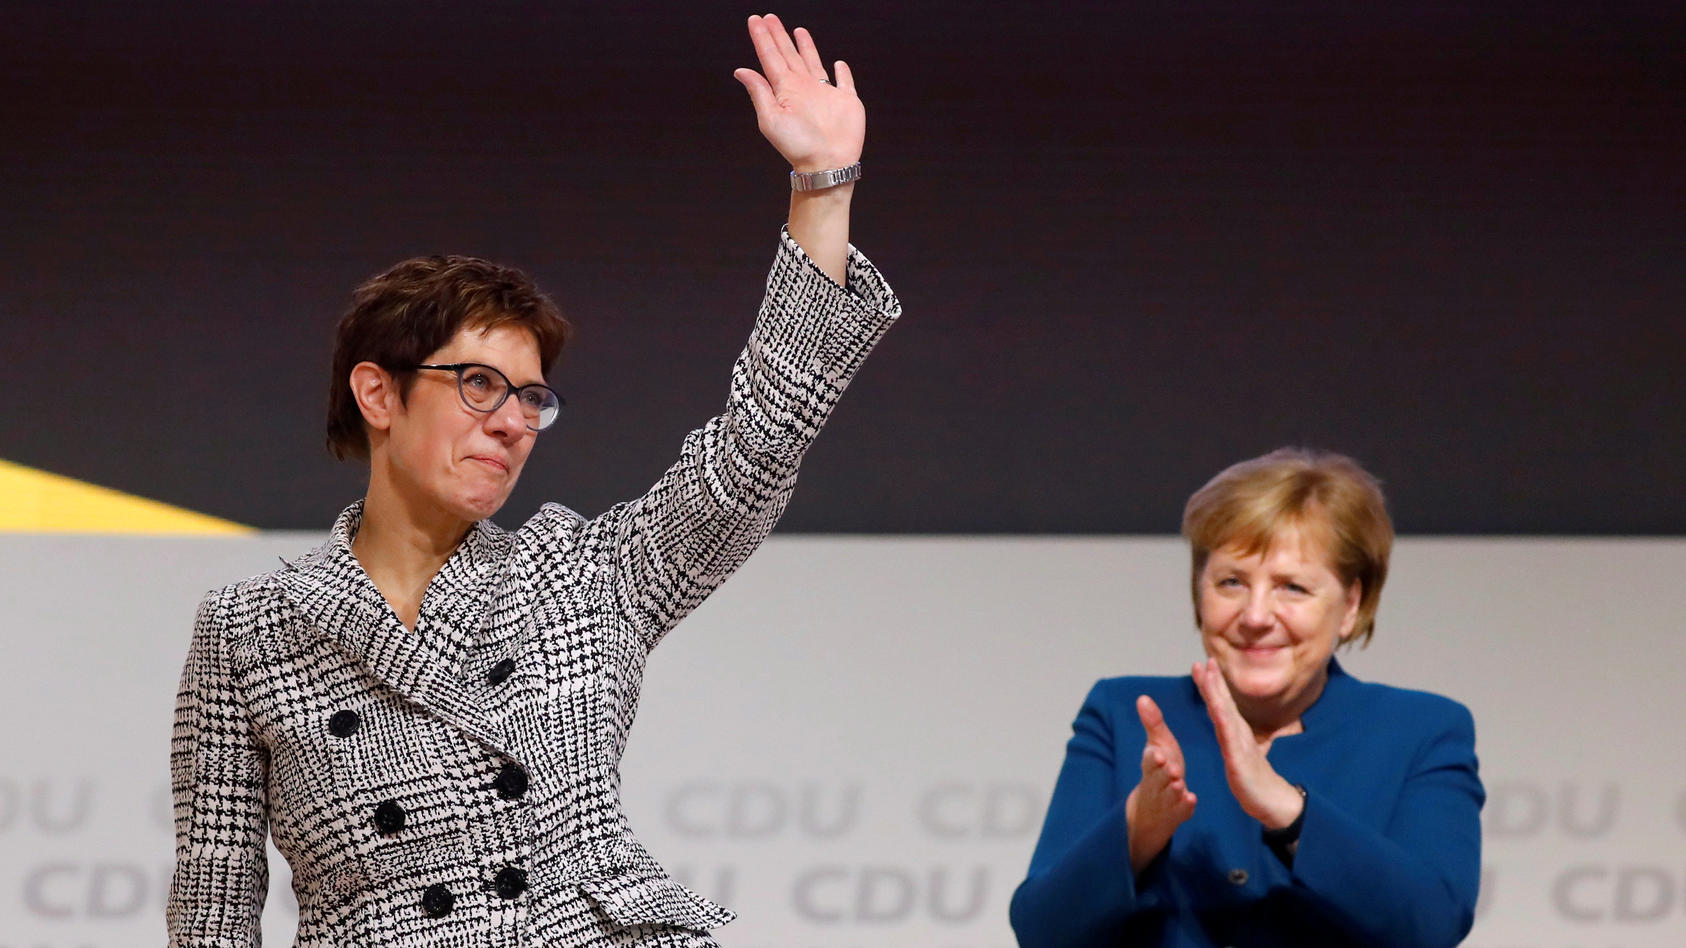 Annegret Kramp-Karrenbauer waves next to German Chancellor Angela Merkel after being elected as the party leader during the Christian Democratic Union (CDU) party congress in Hamburg, Germany, December 7, 2018. REUTERS/Kai Pfaffenbach     TPX IMAGES 